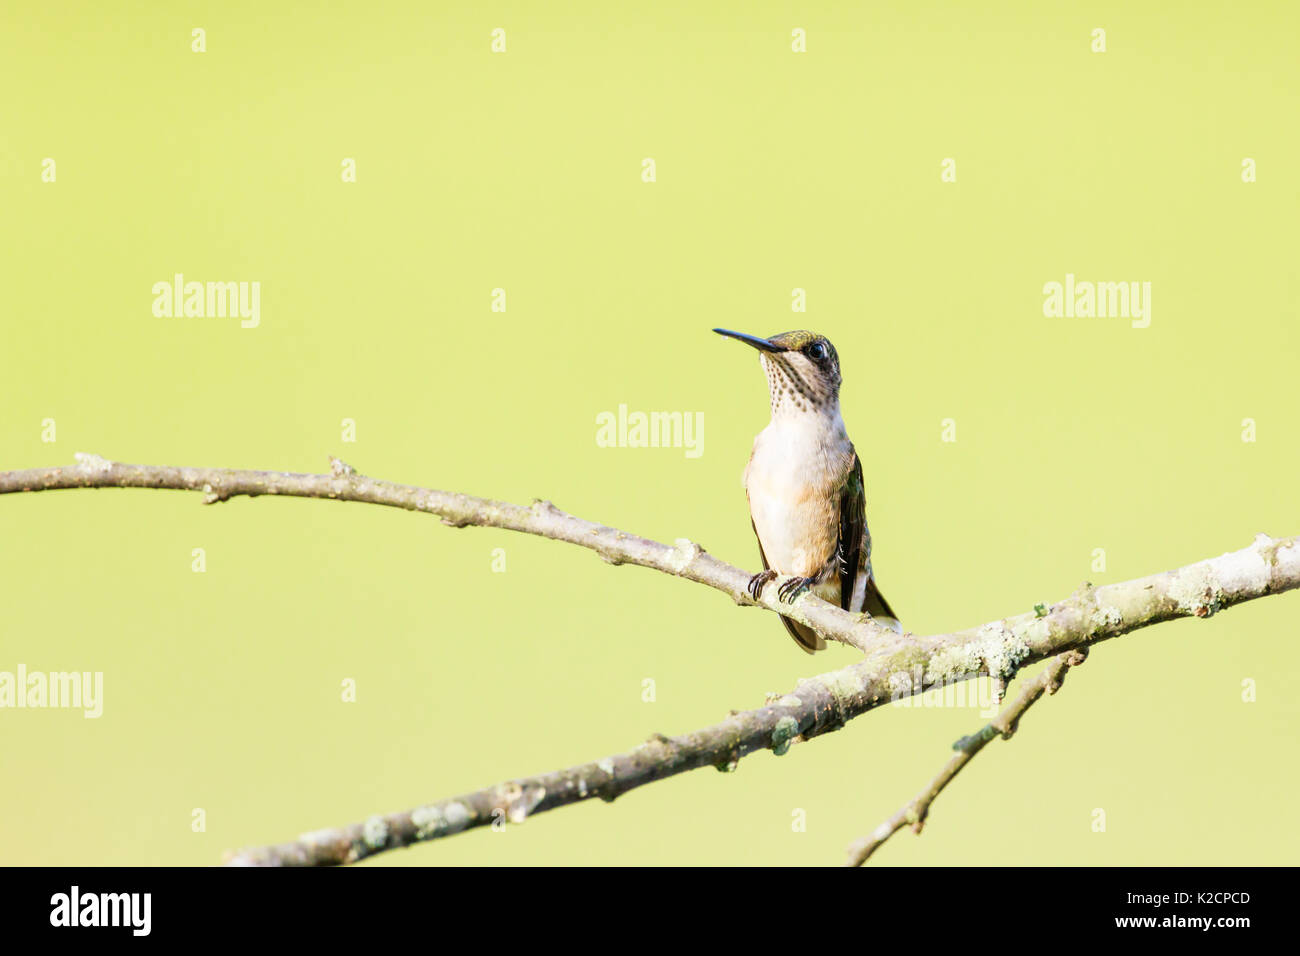 Female Ruby-throated hummingbird, Archilochus colubris, perched on a branch, shot from her front left. Stock Photo